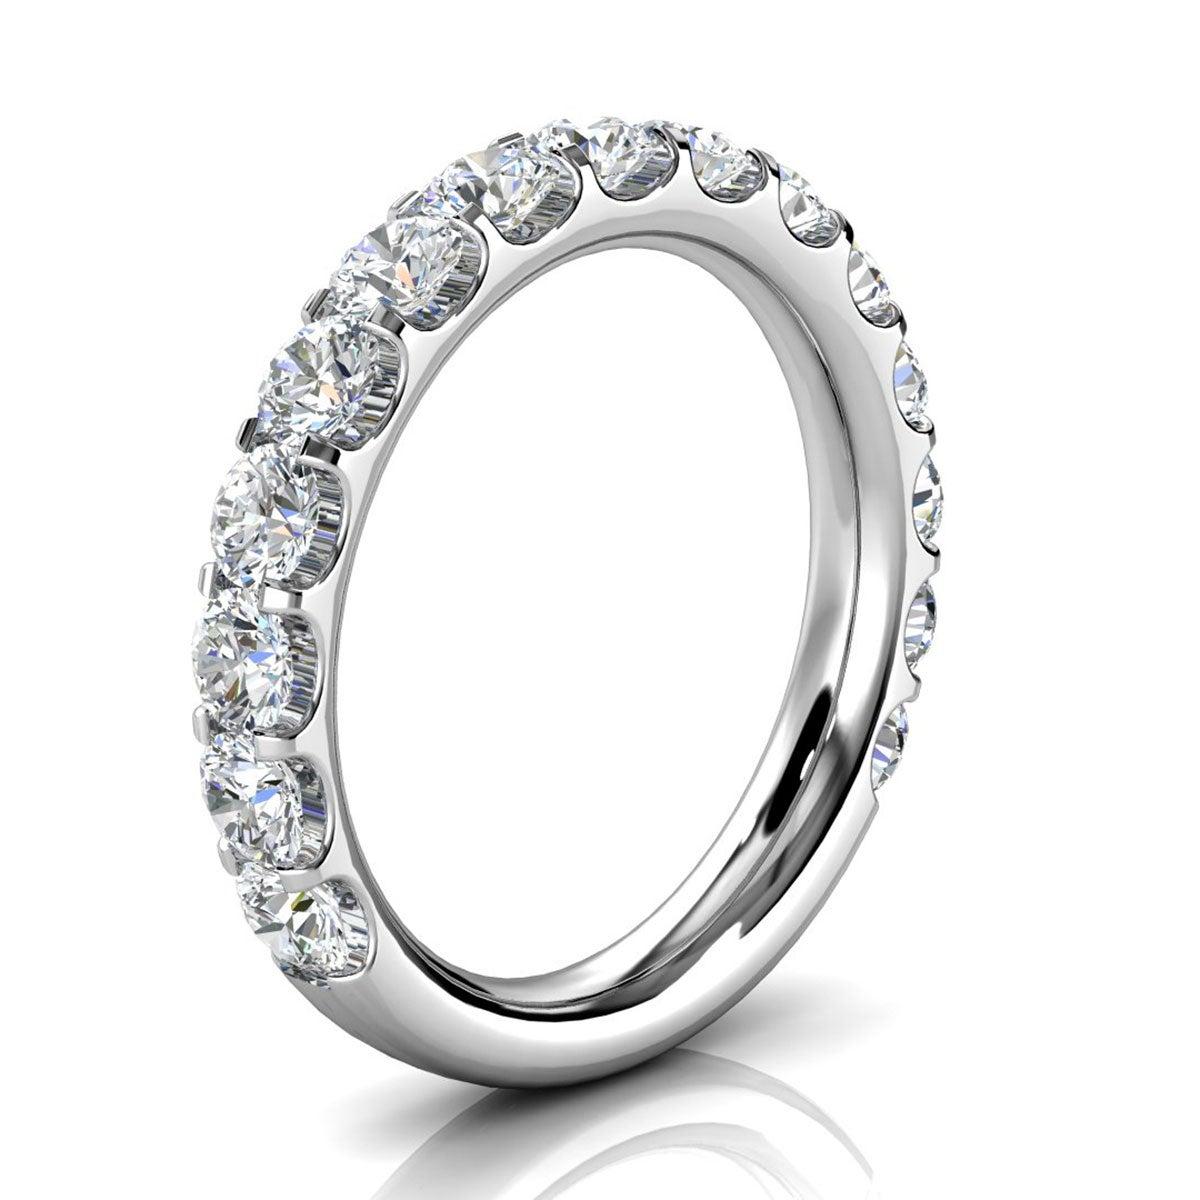 For Sale:  18K White Gold Carole Micro-Prong Diamond Ring '1 1/2 Ct. tw' 2